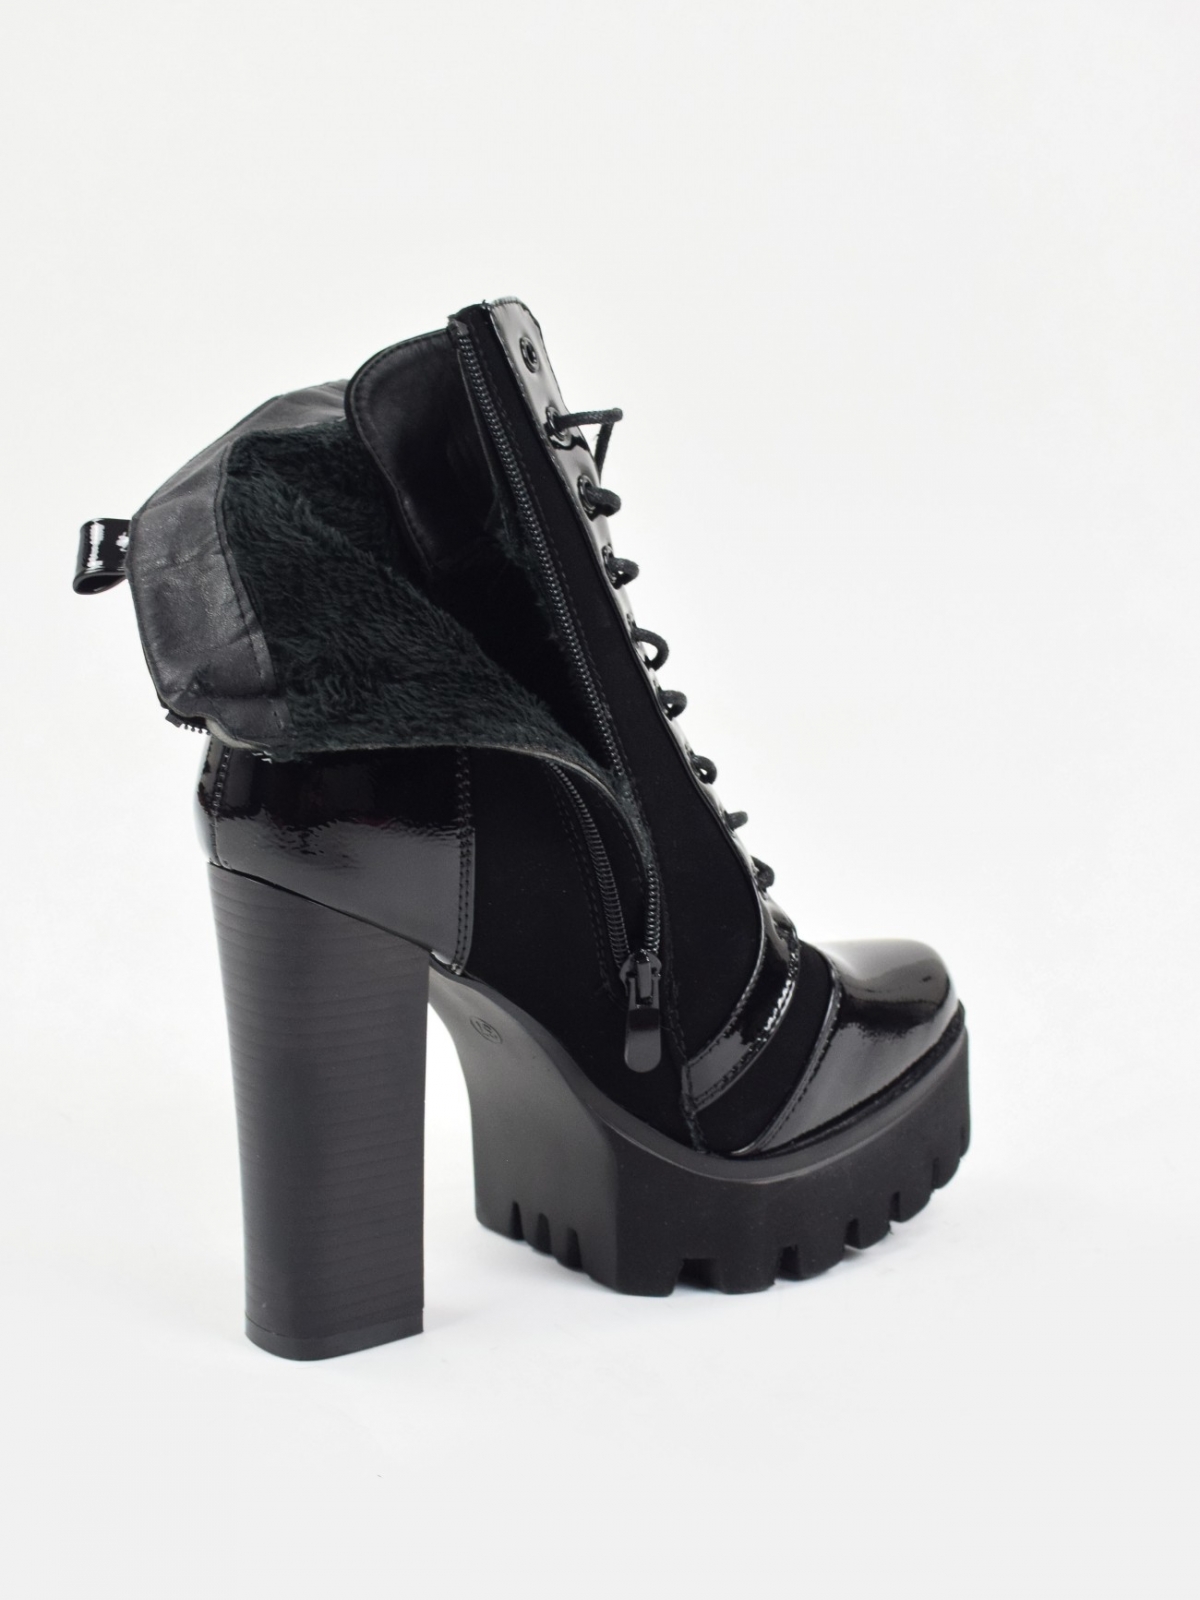 High heeled lace up platform boots in black